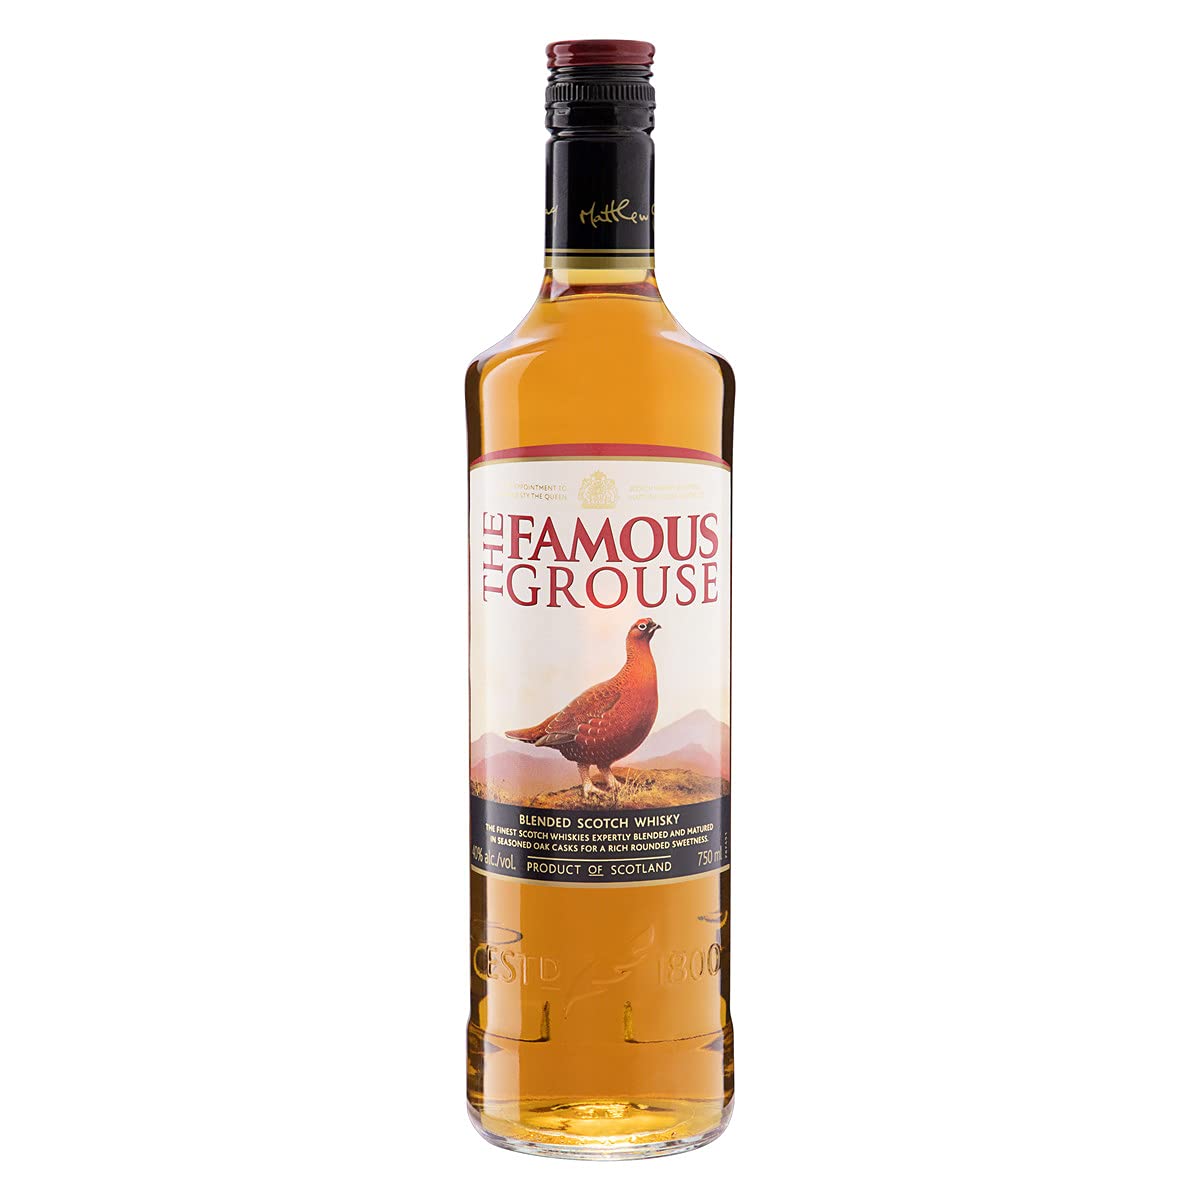 Whisky Famous Grouse, 750 ml